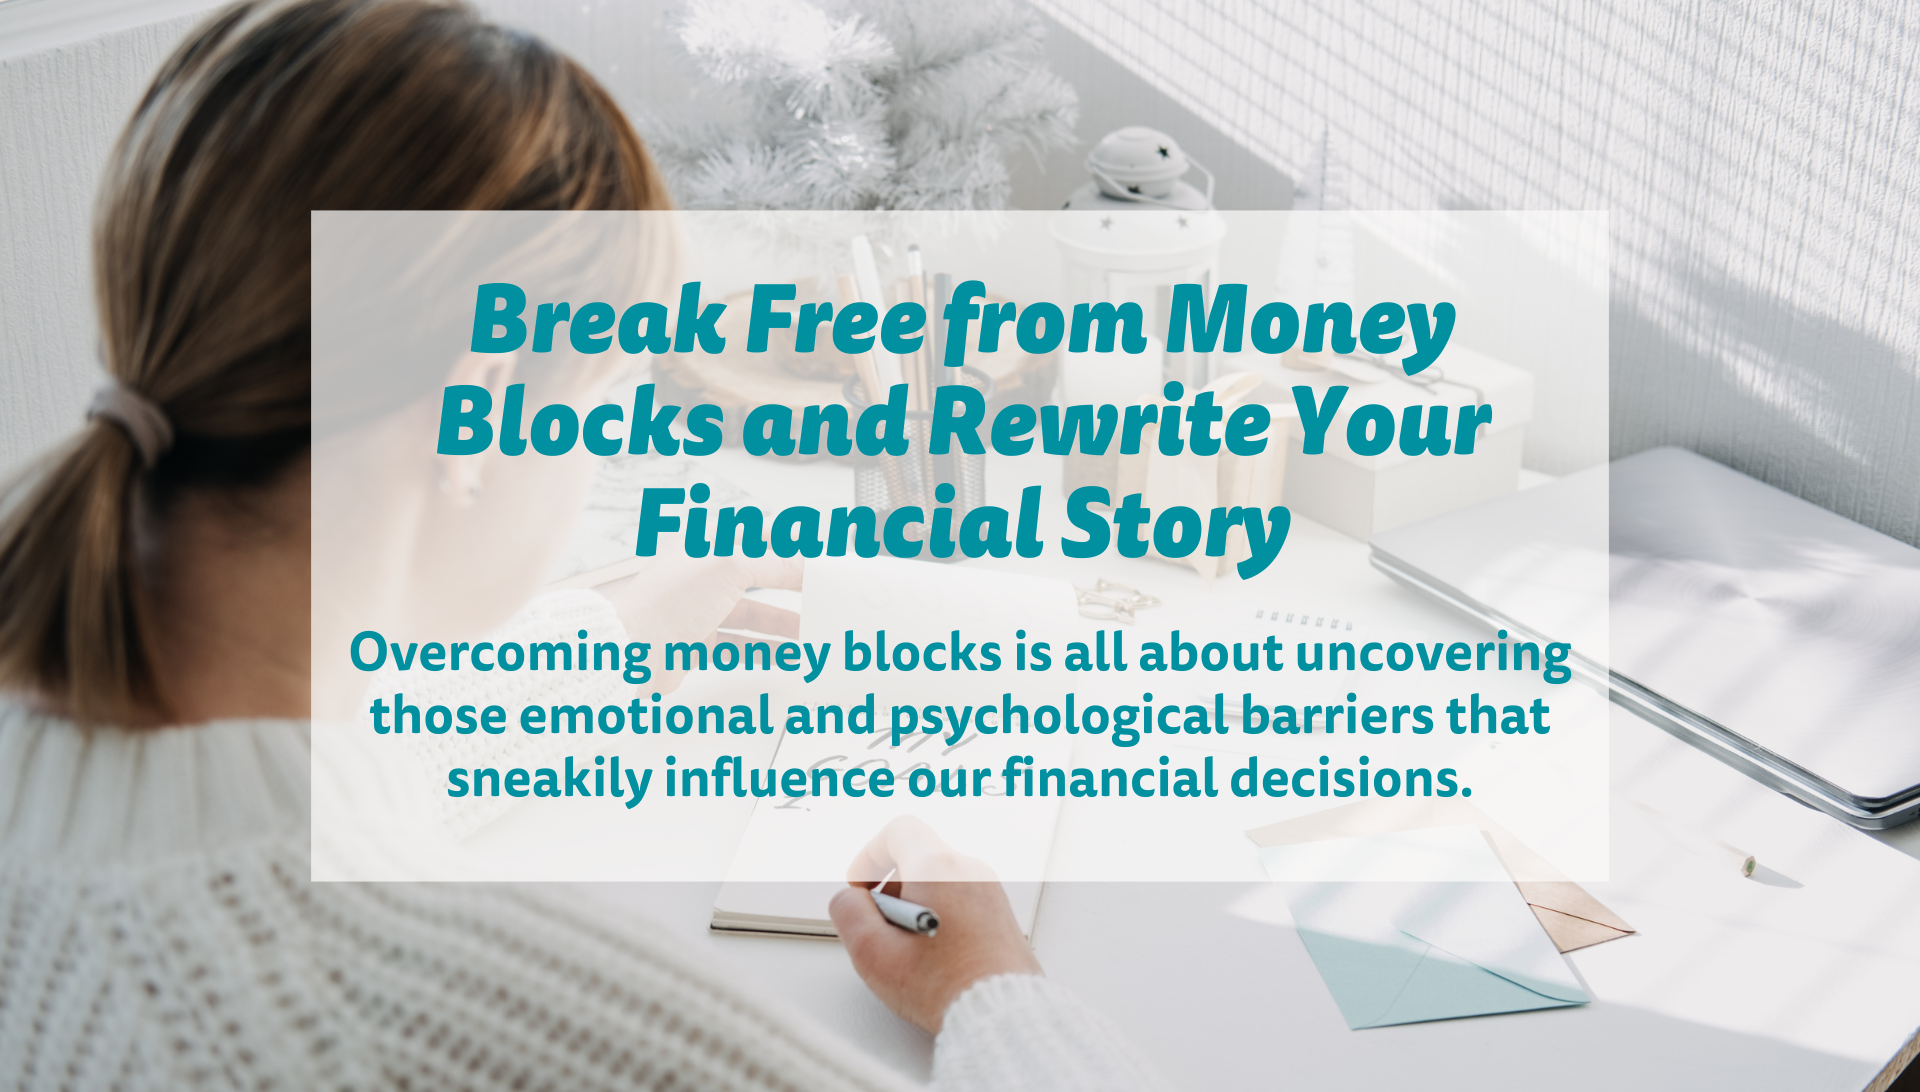 Overcoming money blocks is all about uncovering those emotional and psychological barriers. 